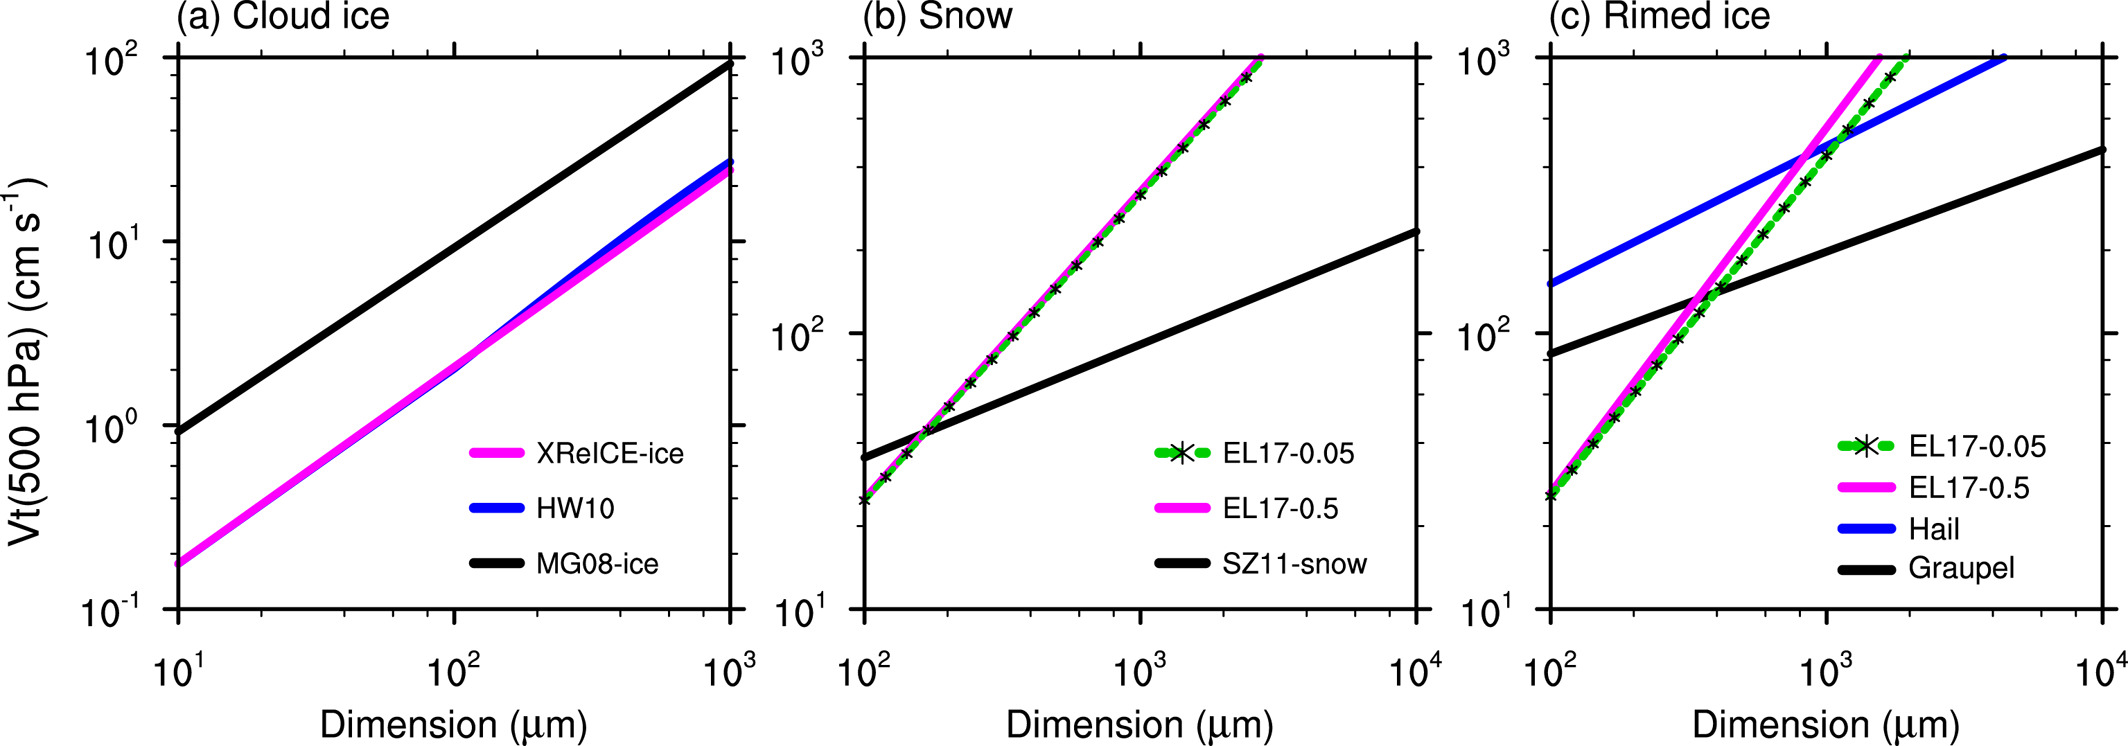 Three plots are labeled, from left to right, cloud ice, snow, and rimed ice with four lines in each plot representing different parameterizations.